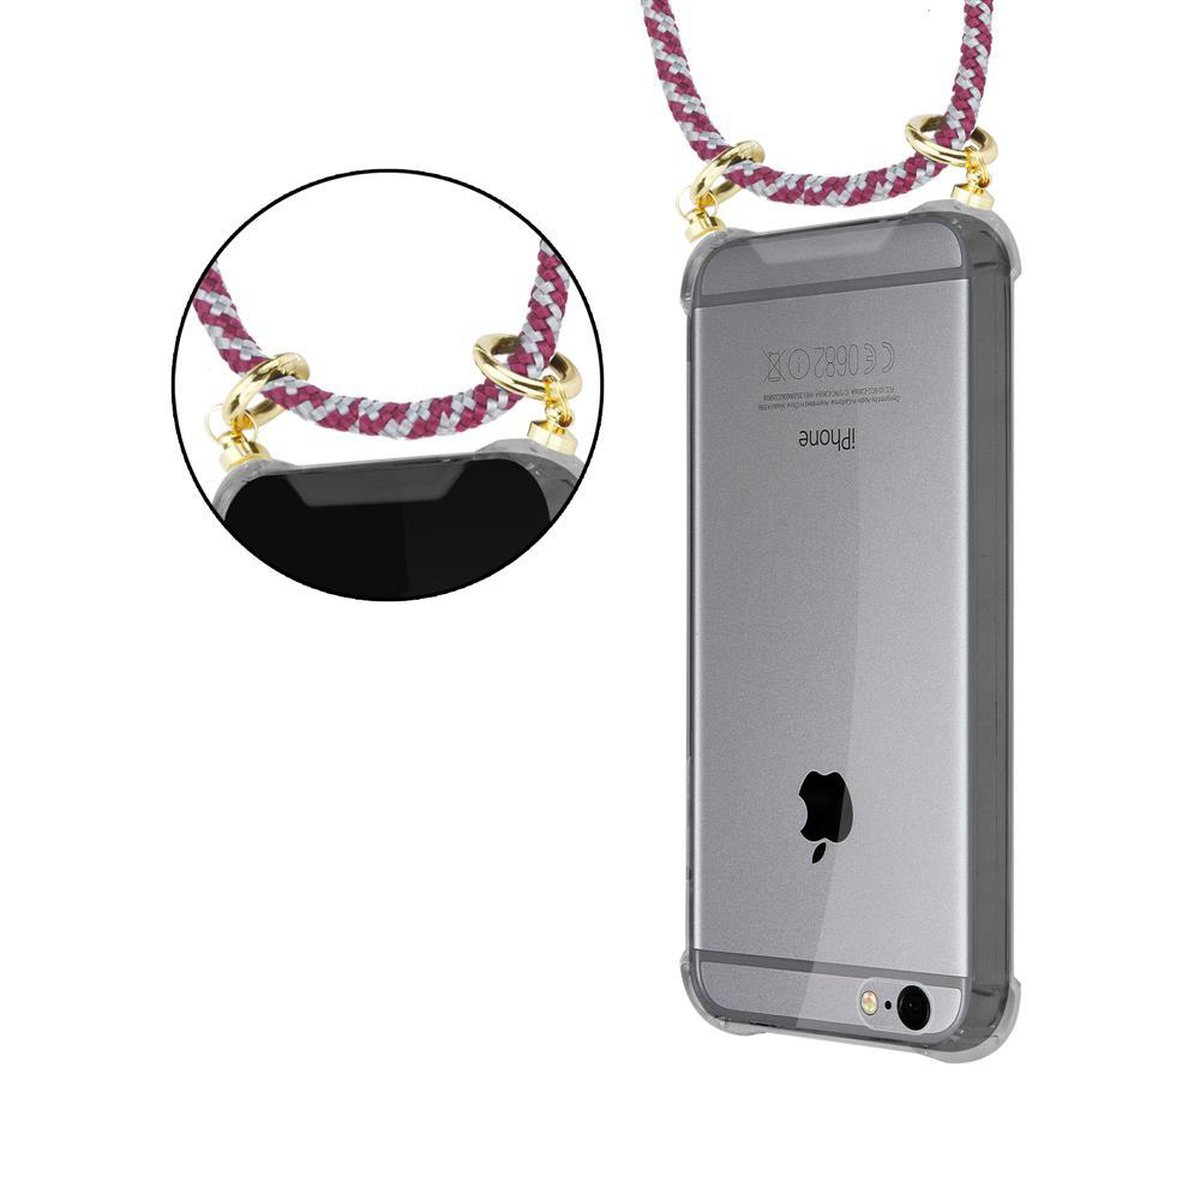 CADORABO Handy Kette mit Apple, / iPhone Backcover, Band Hülle, abnehmbarer WEIß und ROT 6 Gold Kordel Ringen, 6S